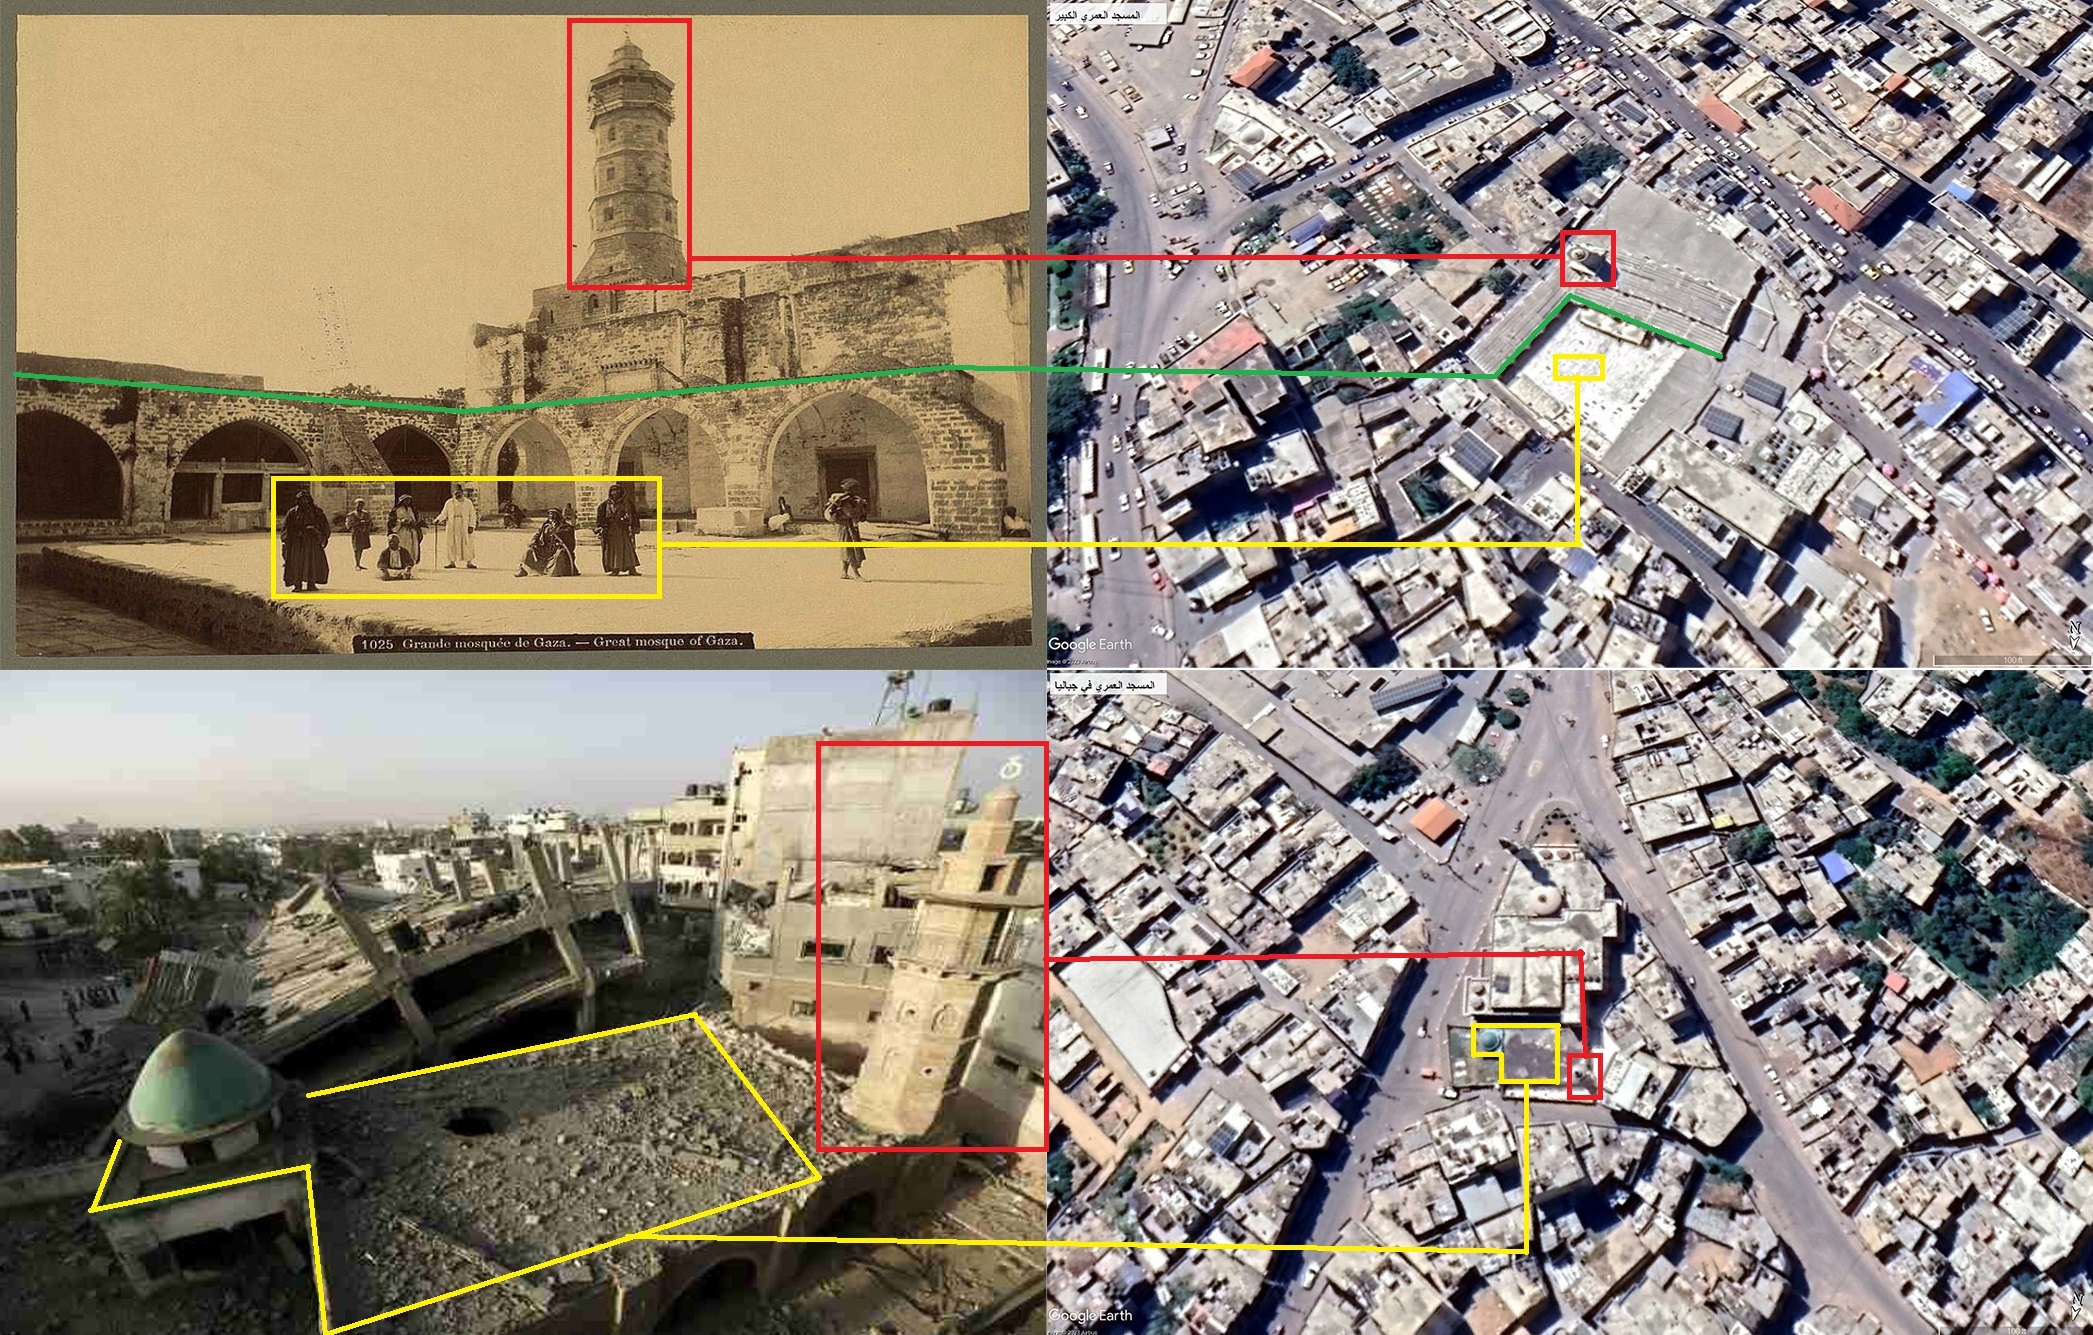 A composite of satellite imagery of the Al Omari mosque, archival imagery, and an aerial photo after the attack.